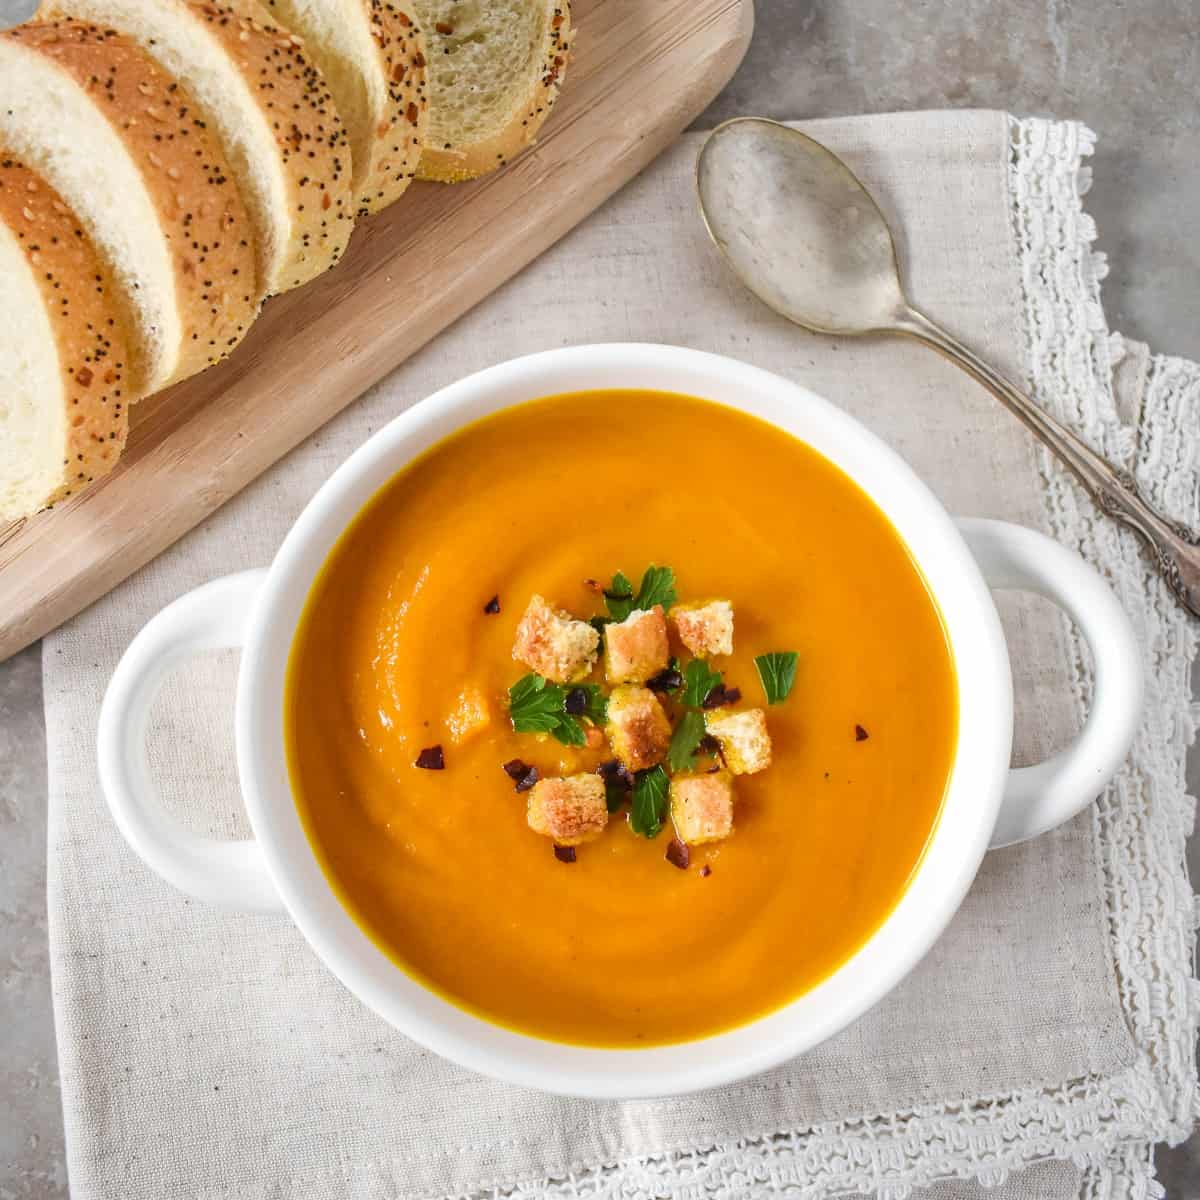 https://www.cook2eatwell.com/wp-content/uploads/2019/11/carrot-ginger-soup-image-1-1.jpg